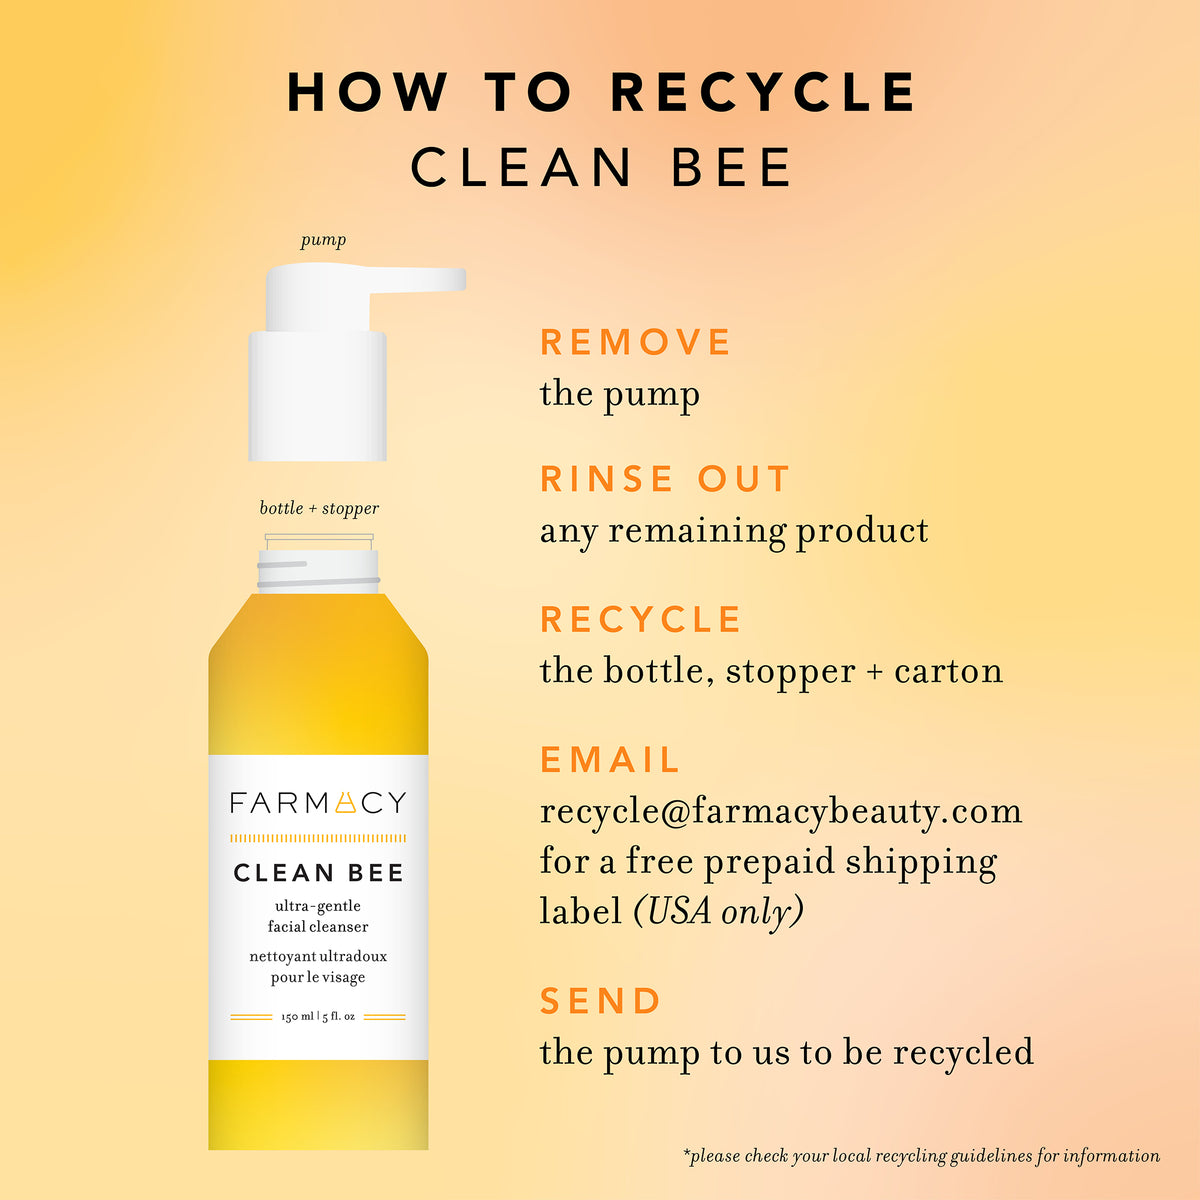 How to recycle Clean Bee